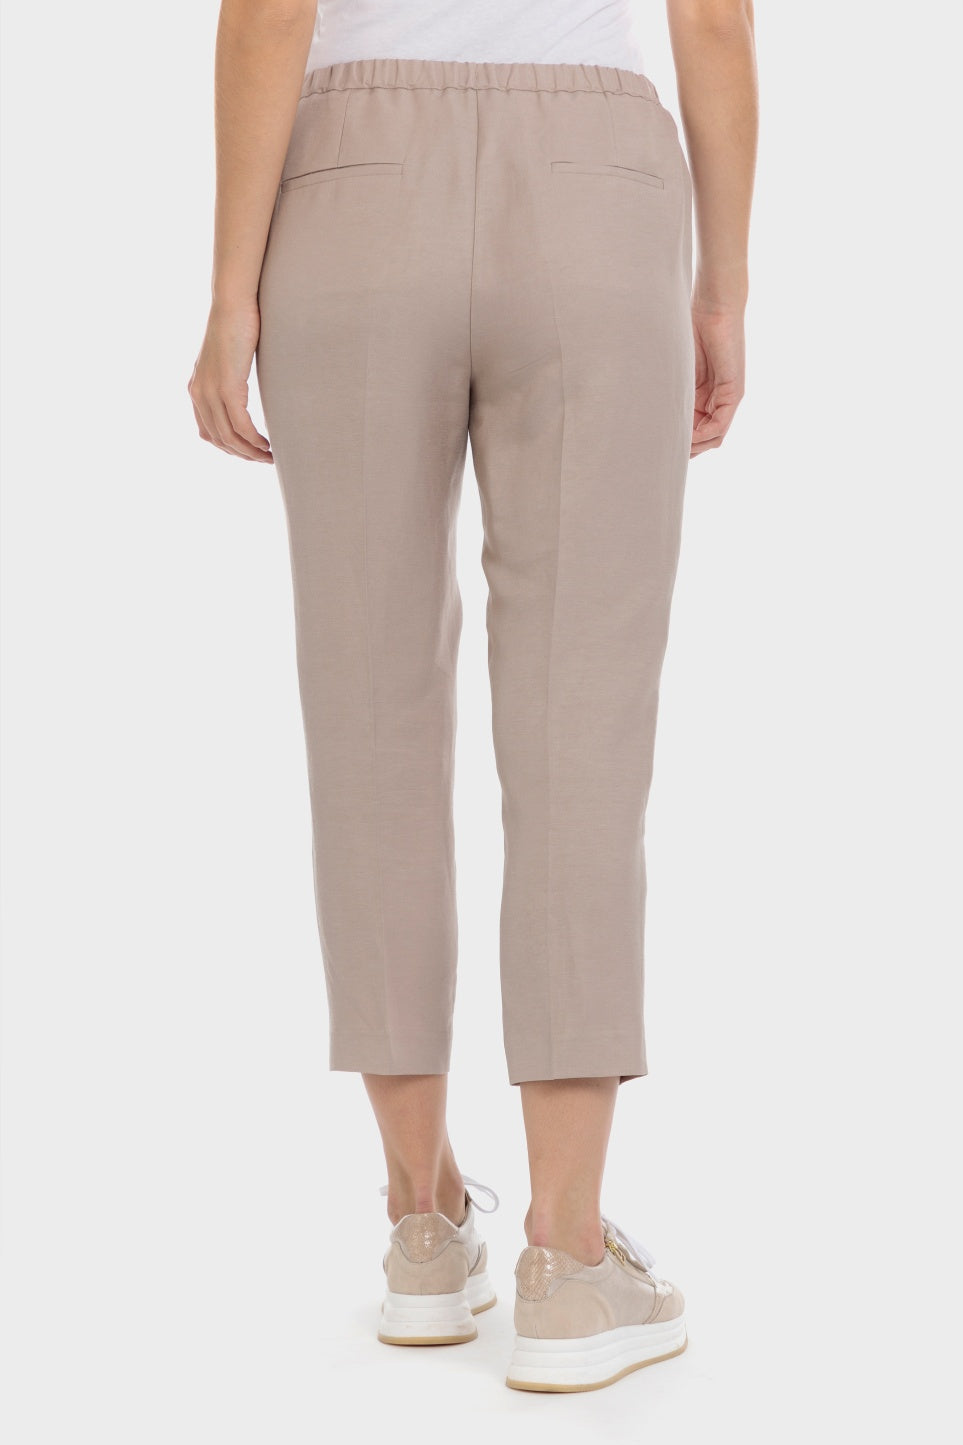 Punt Roma Beige Trousers 3 Shaws Department Stores